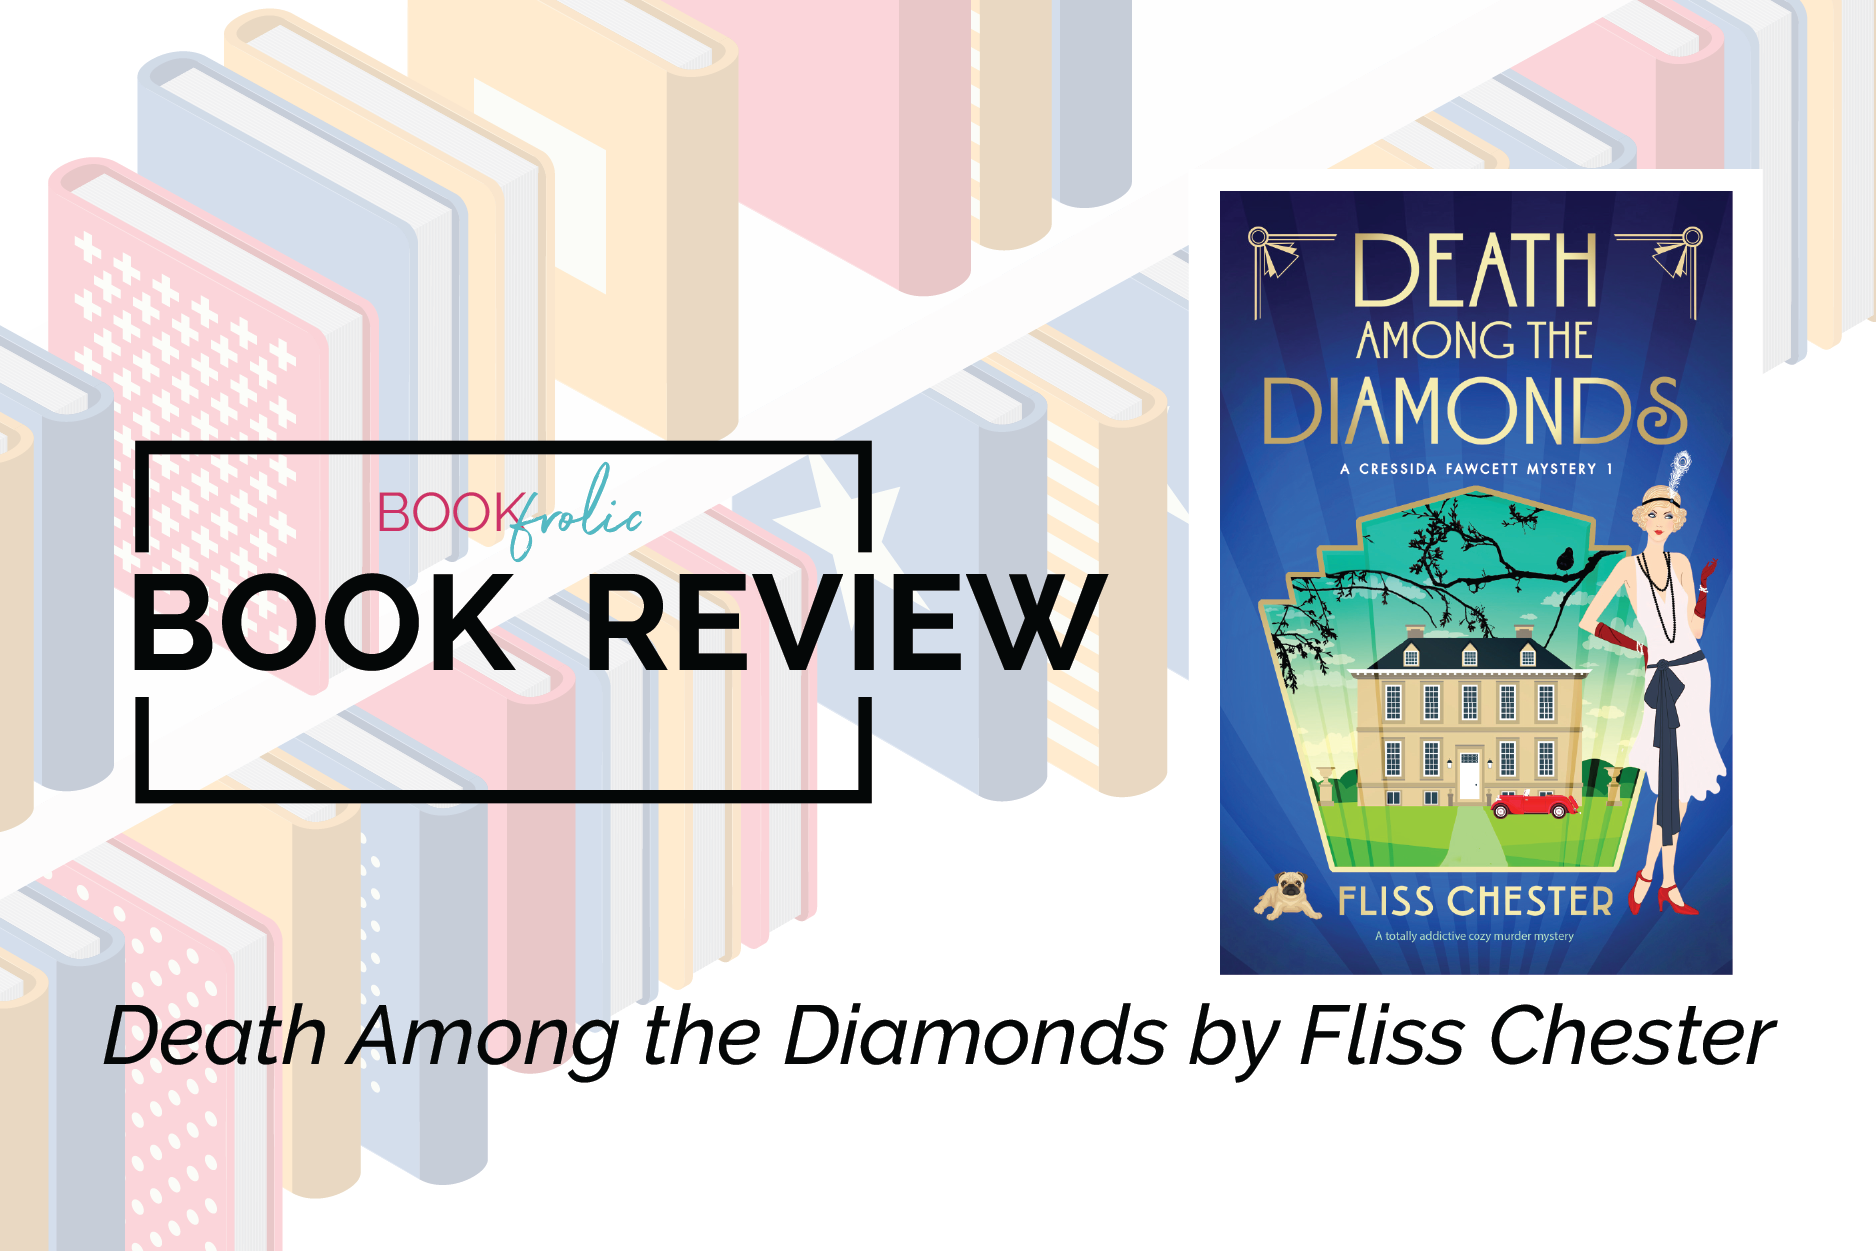 book review banner for Death Among the Diamonds by Fliss Chester